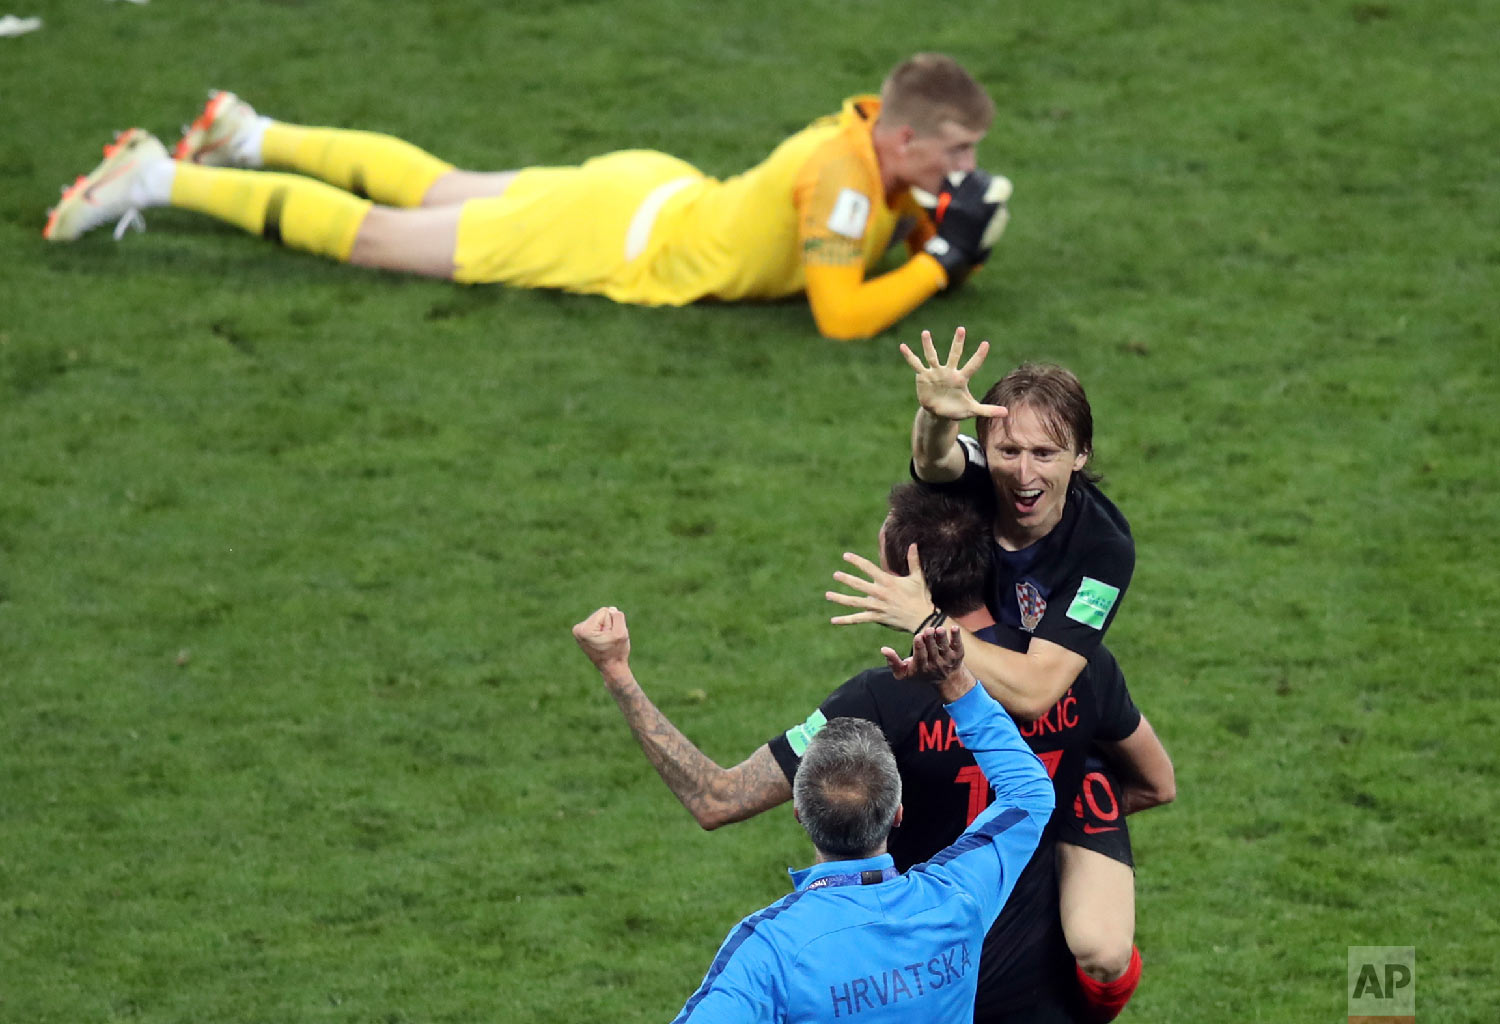  Croatia's Luka Modric, right, celebrates next to England goalkeeper Jordan Pickford, on the ground, at the end of the semifinal match between Croatia and England at the 2018 soccer World Cup in the Luzhniki Stadium in Moscow, Russia, Wednesday, July